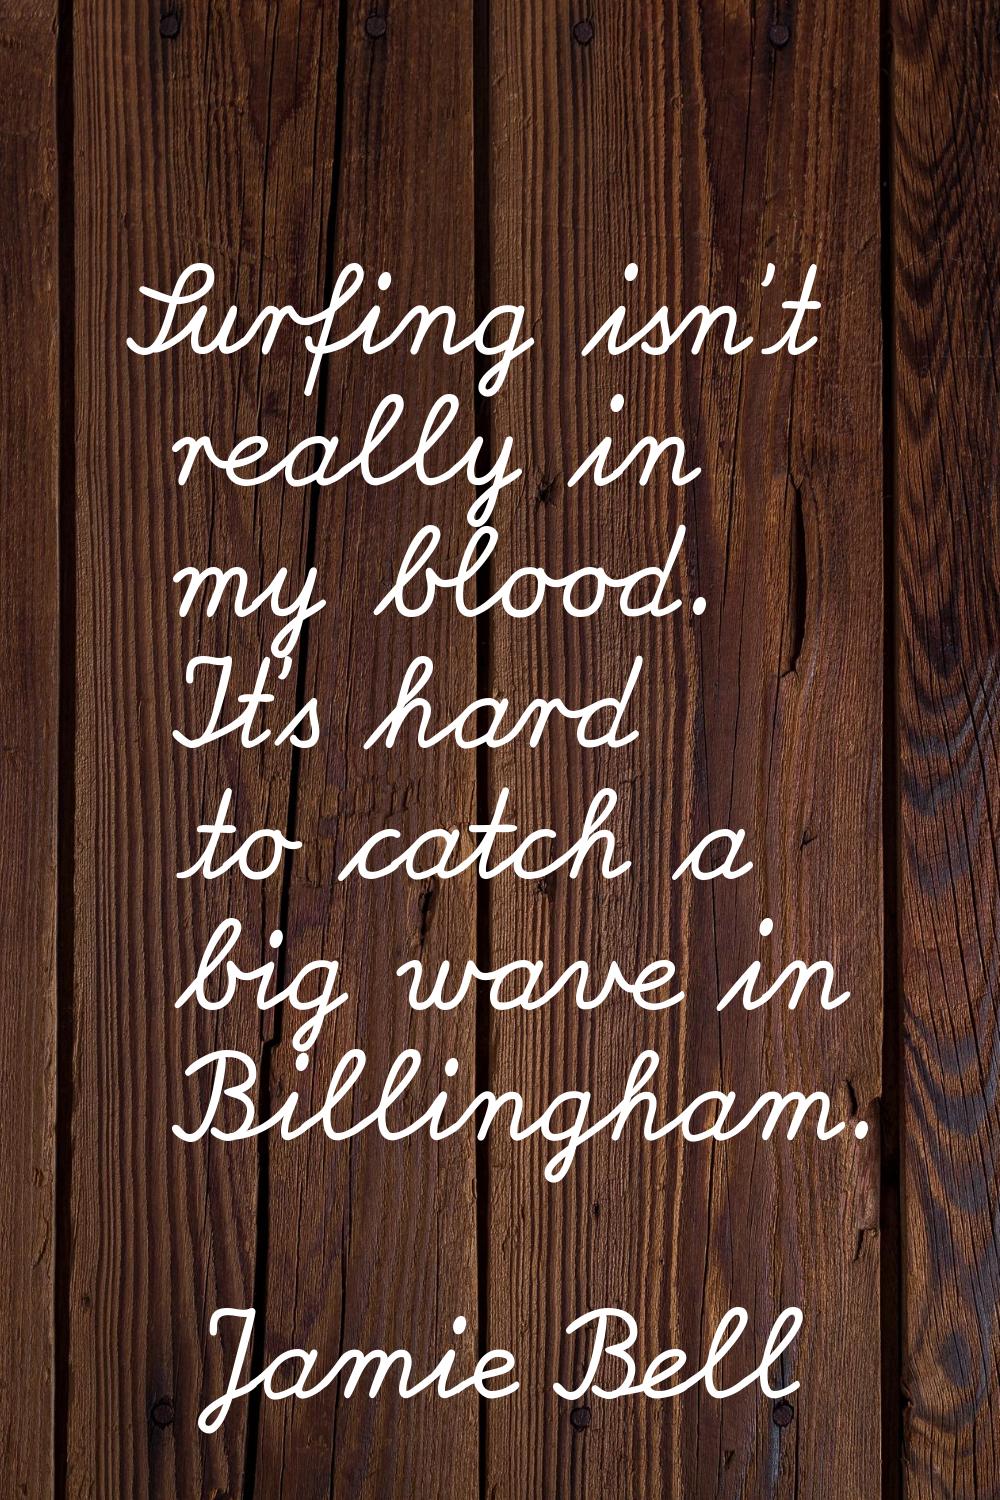 Surfing isn't really in my blood. It's hard to catch a big wave in Billingham.